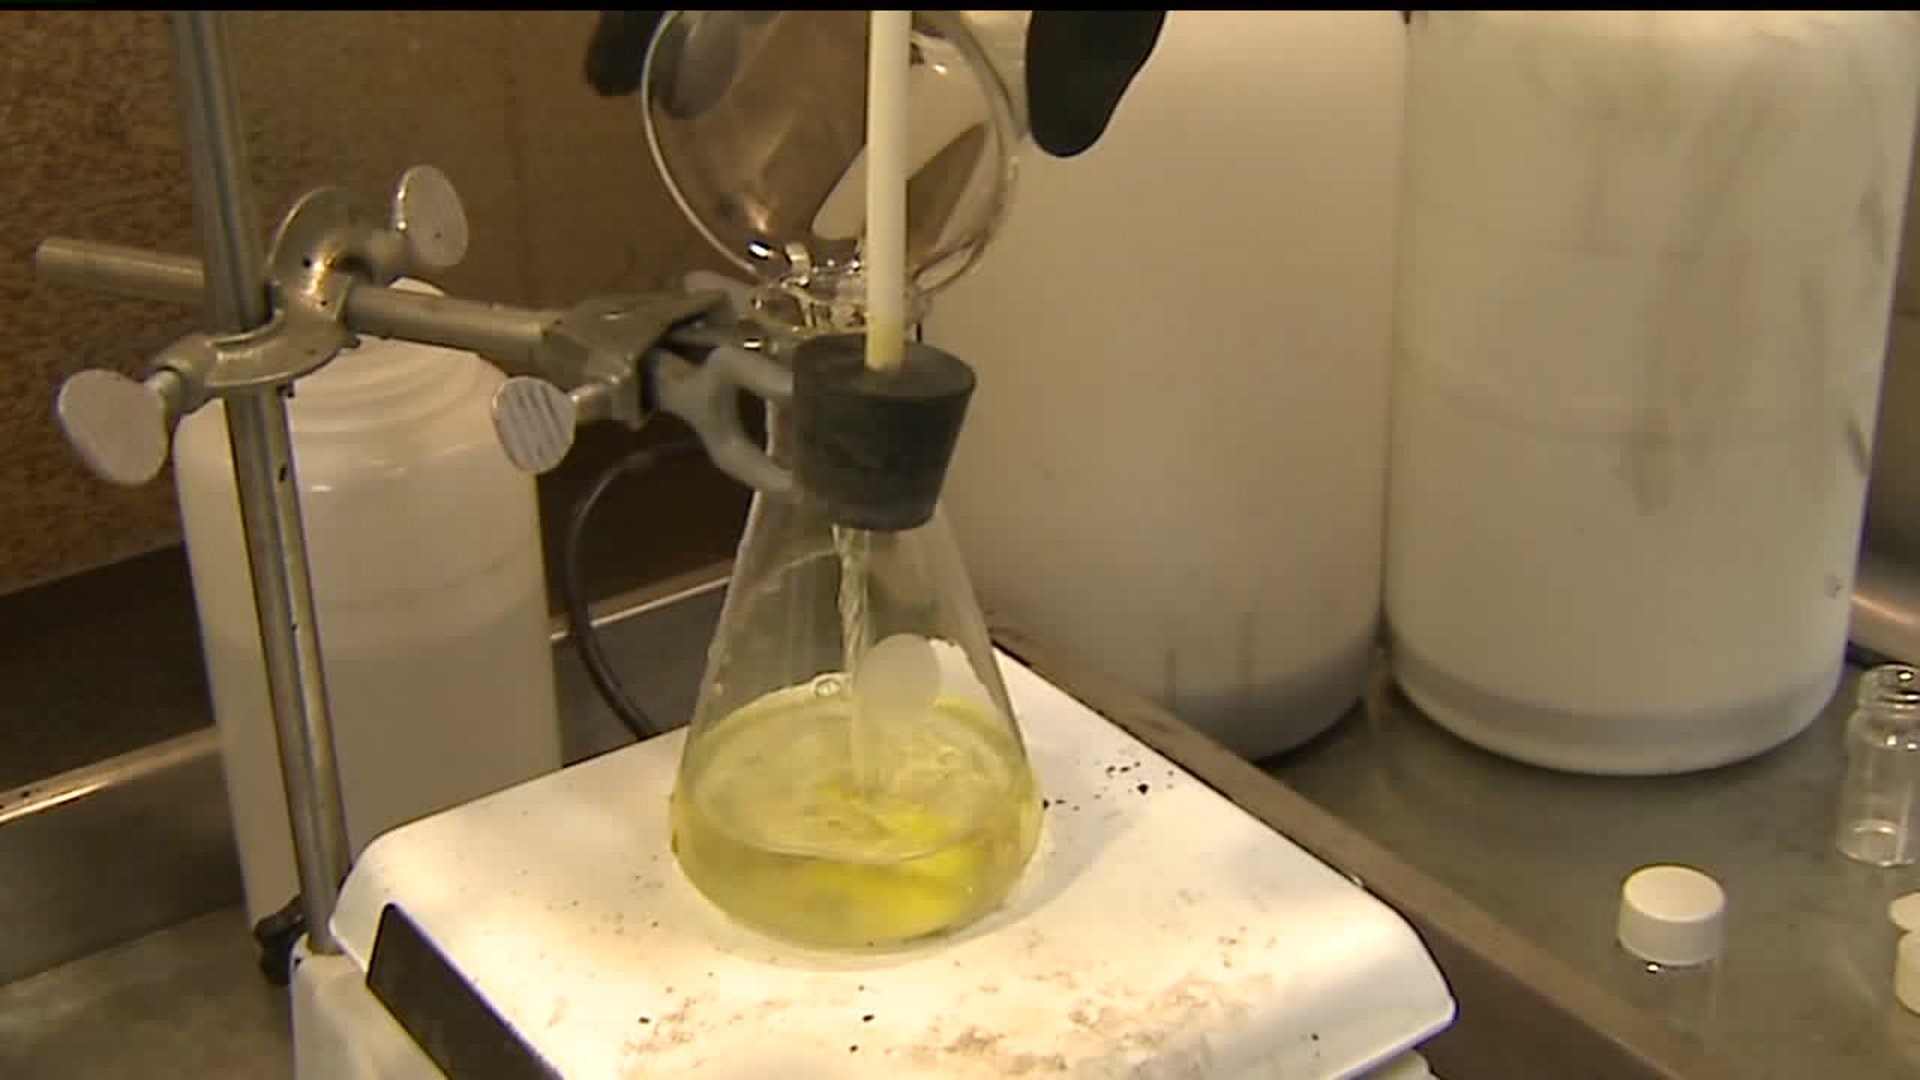 U.S. Army in Maryland using urine to generate power